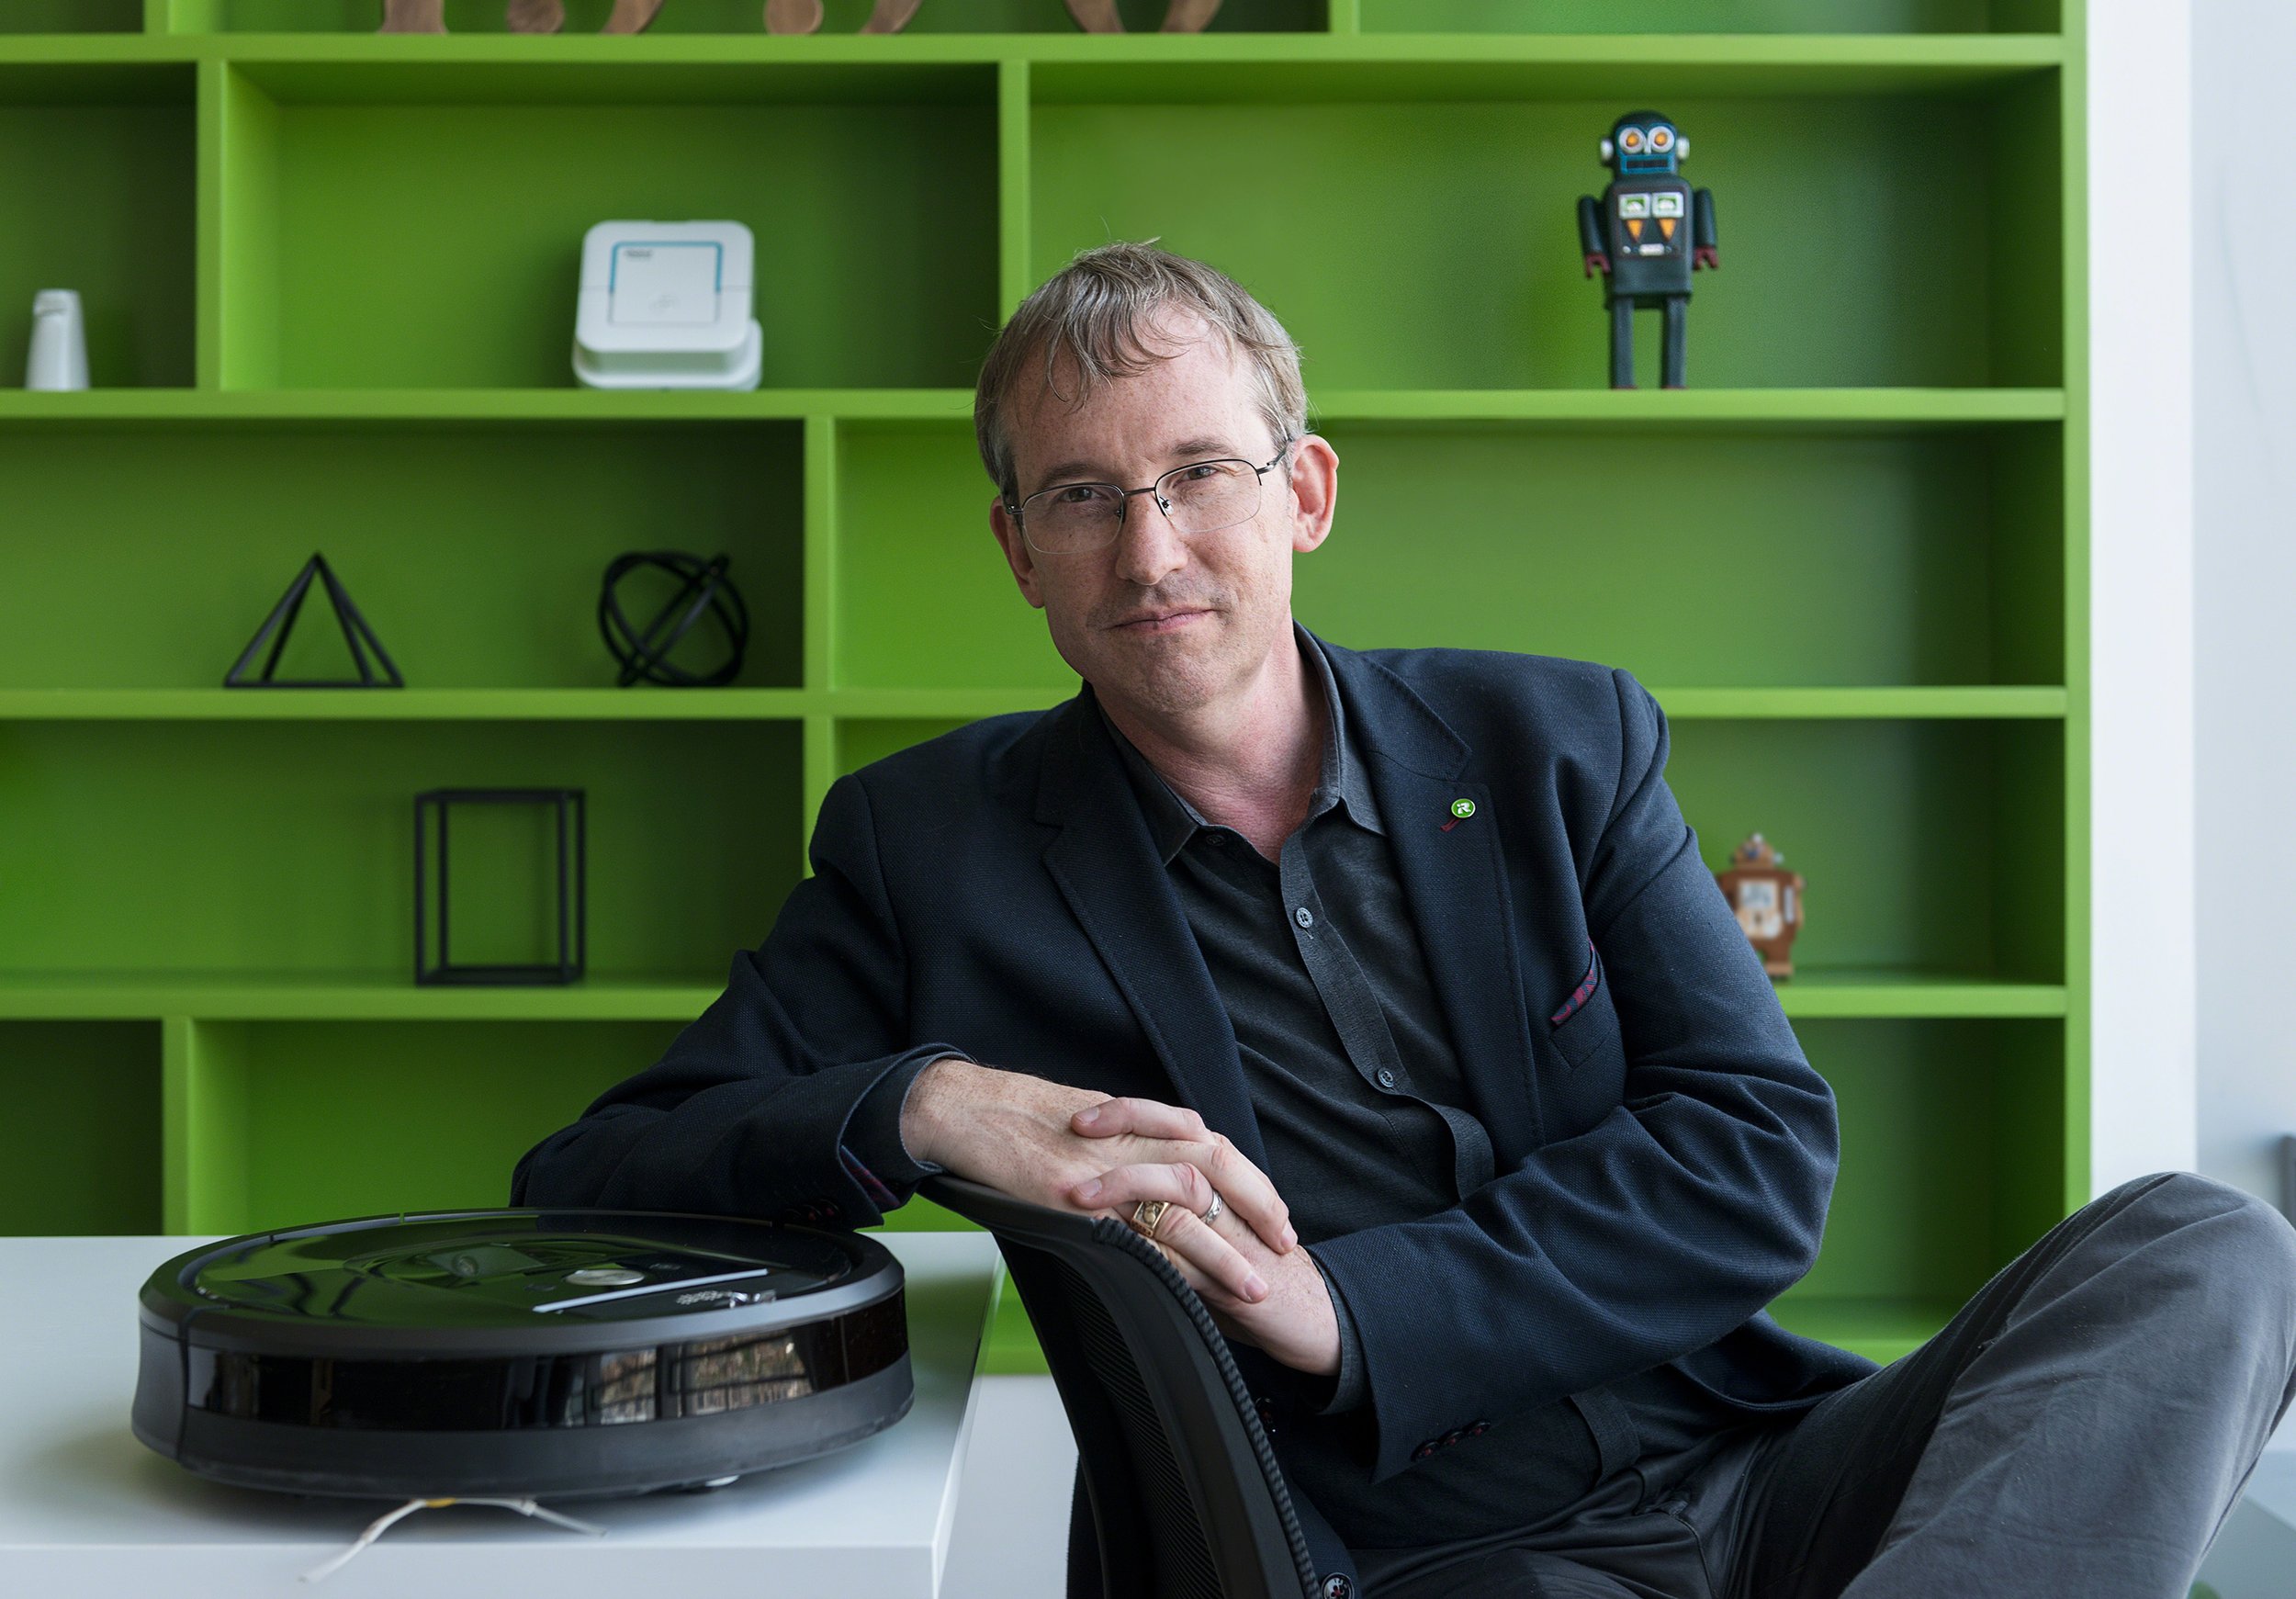 Colin Angle, CEO, Chairman and Founder, iRobot